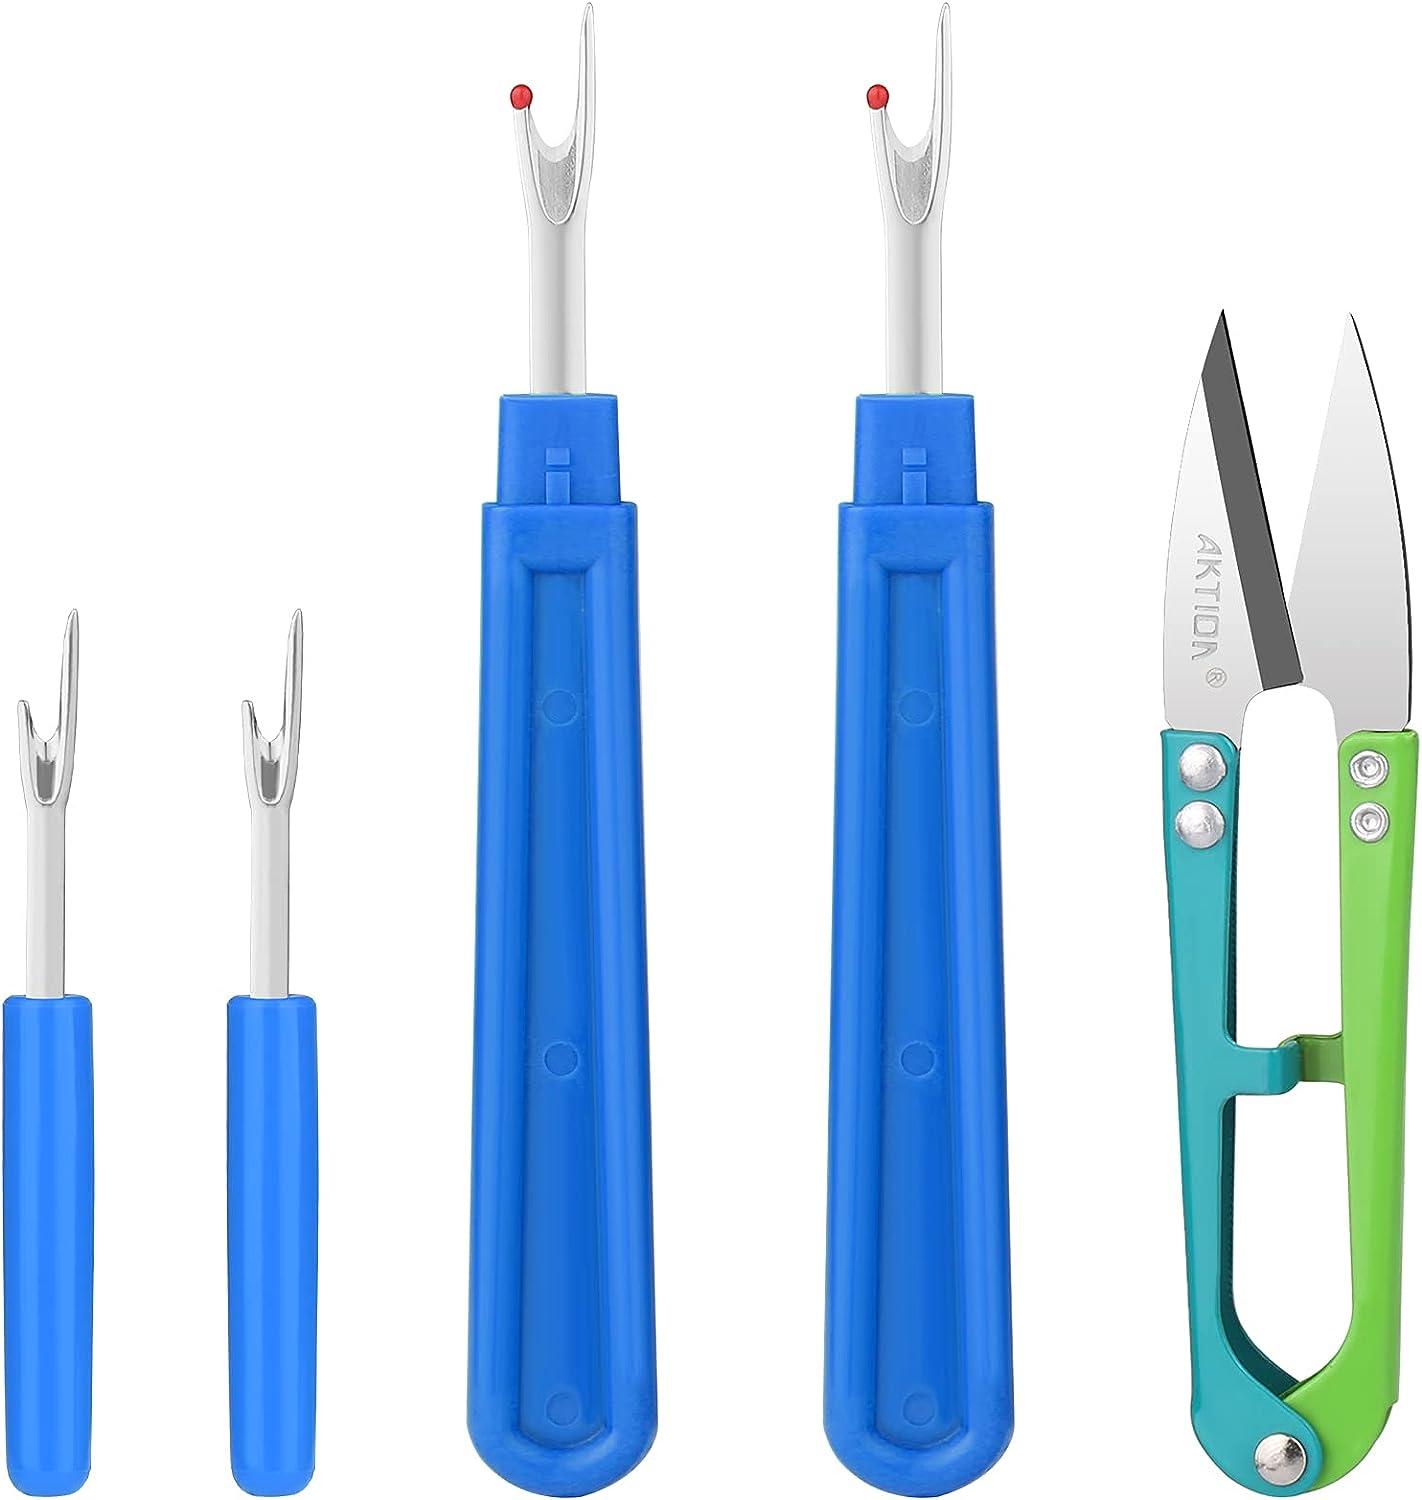  Sewing Seam Ripper Tool,High Quality Stitch Remover and Thread  Cutter with 2Big+2Small Seam Rippers,1 Pack Thread Snips,1Pack 5”Scissor